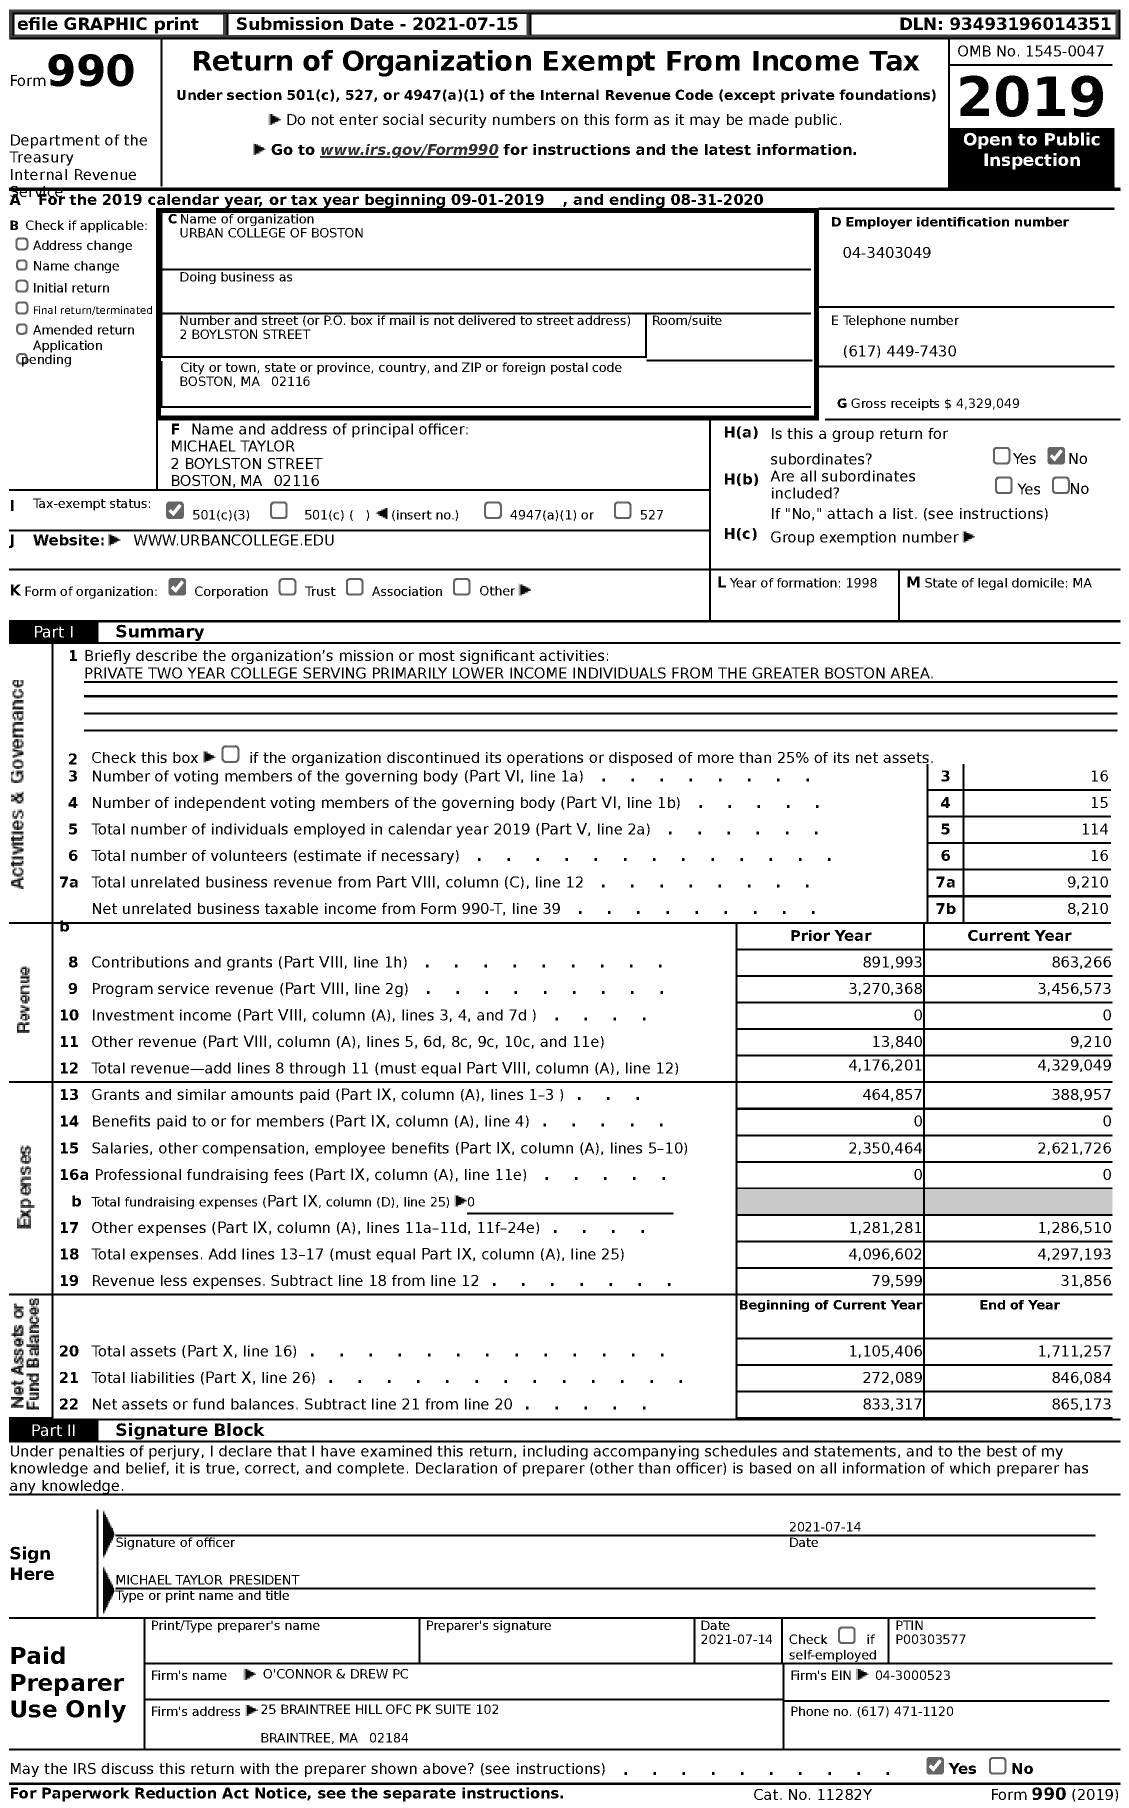 Image of first page of 2019 Form 990 for Urban College of Boston (UCB)